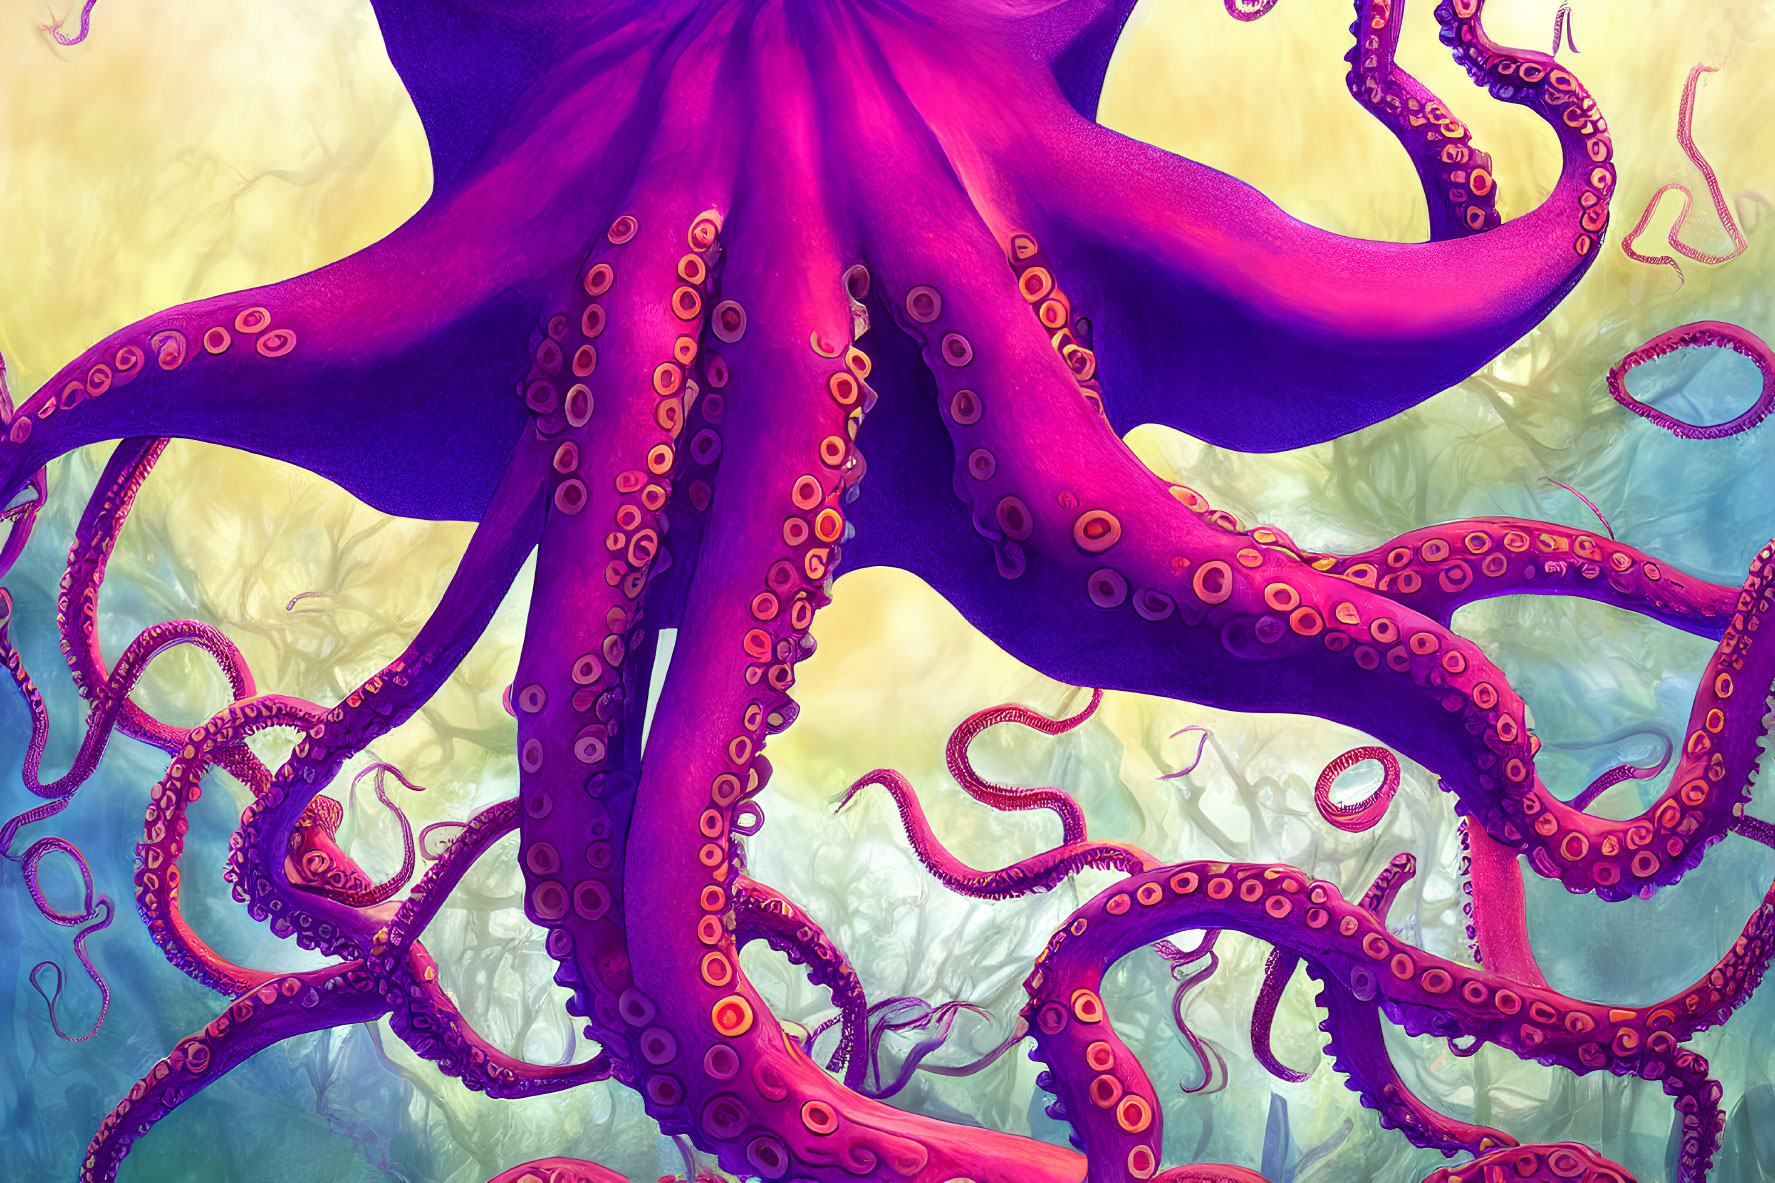 Colorful Purple Octopus Illustration with Extended Tentacles in Underwater Scene